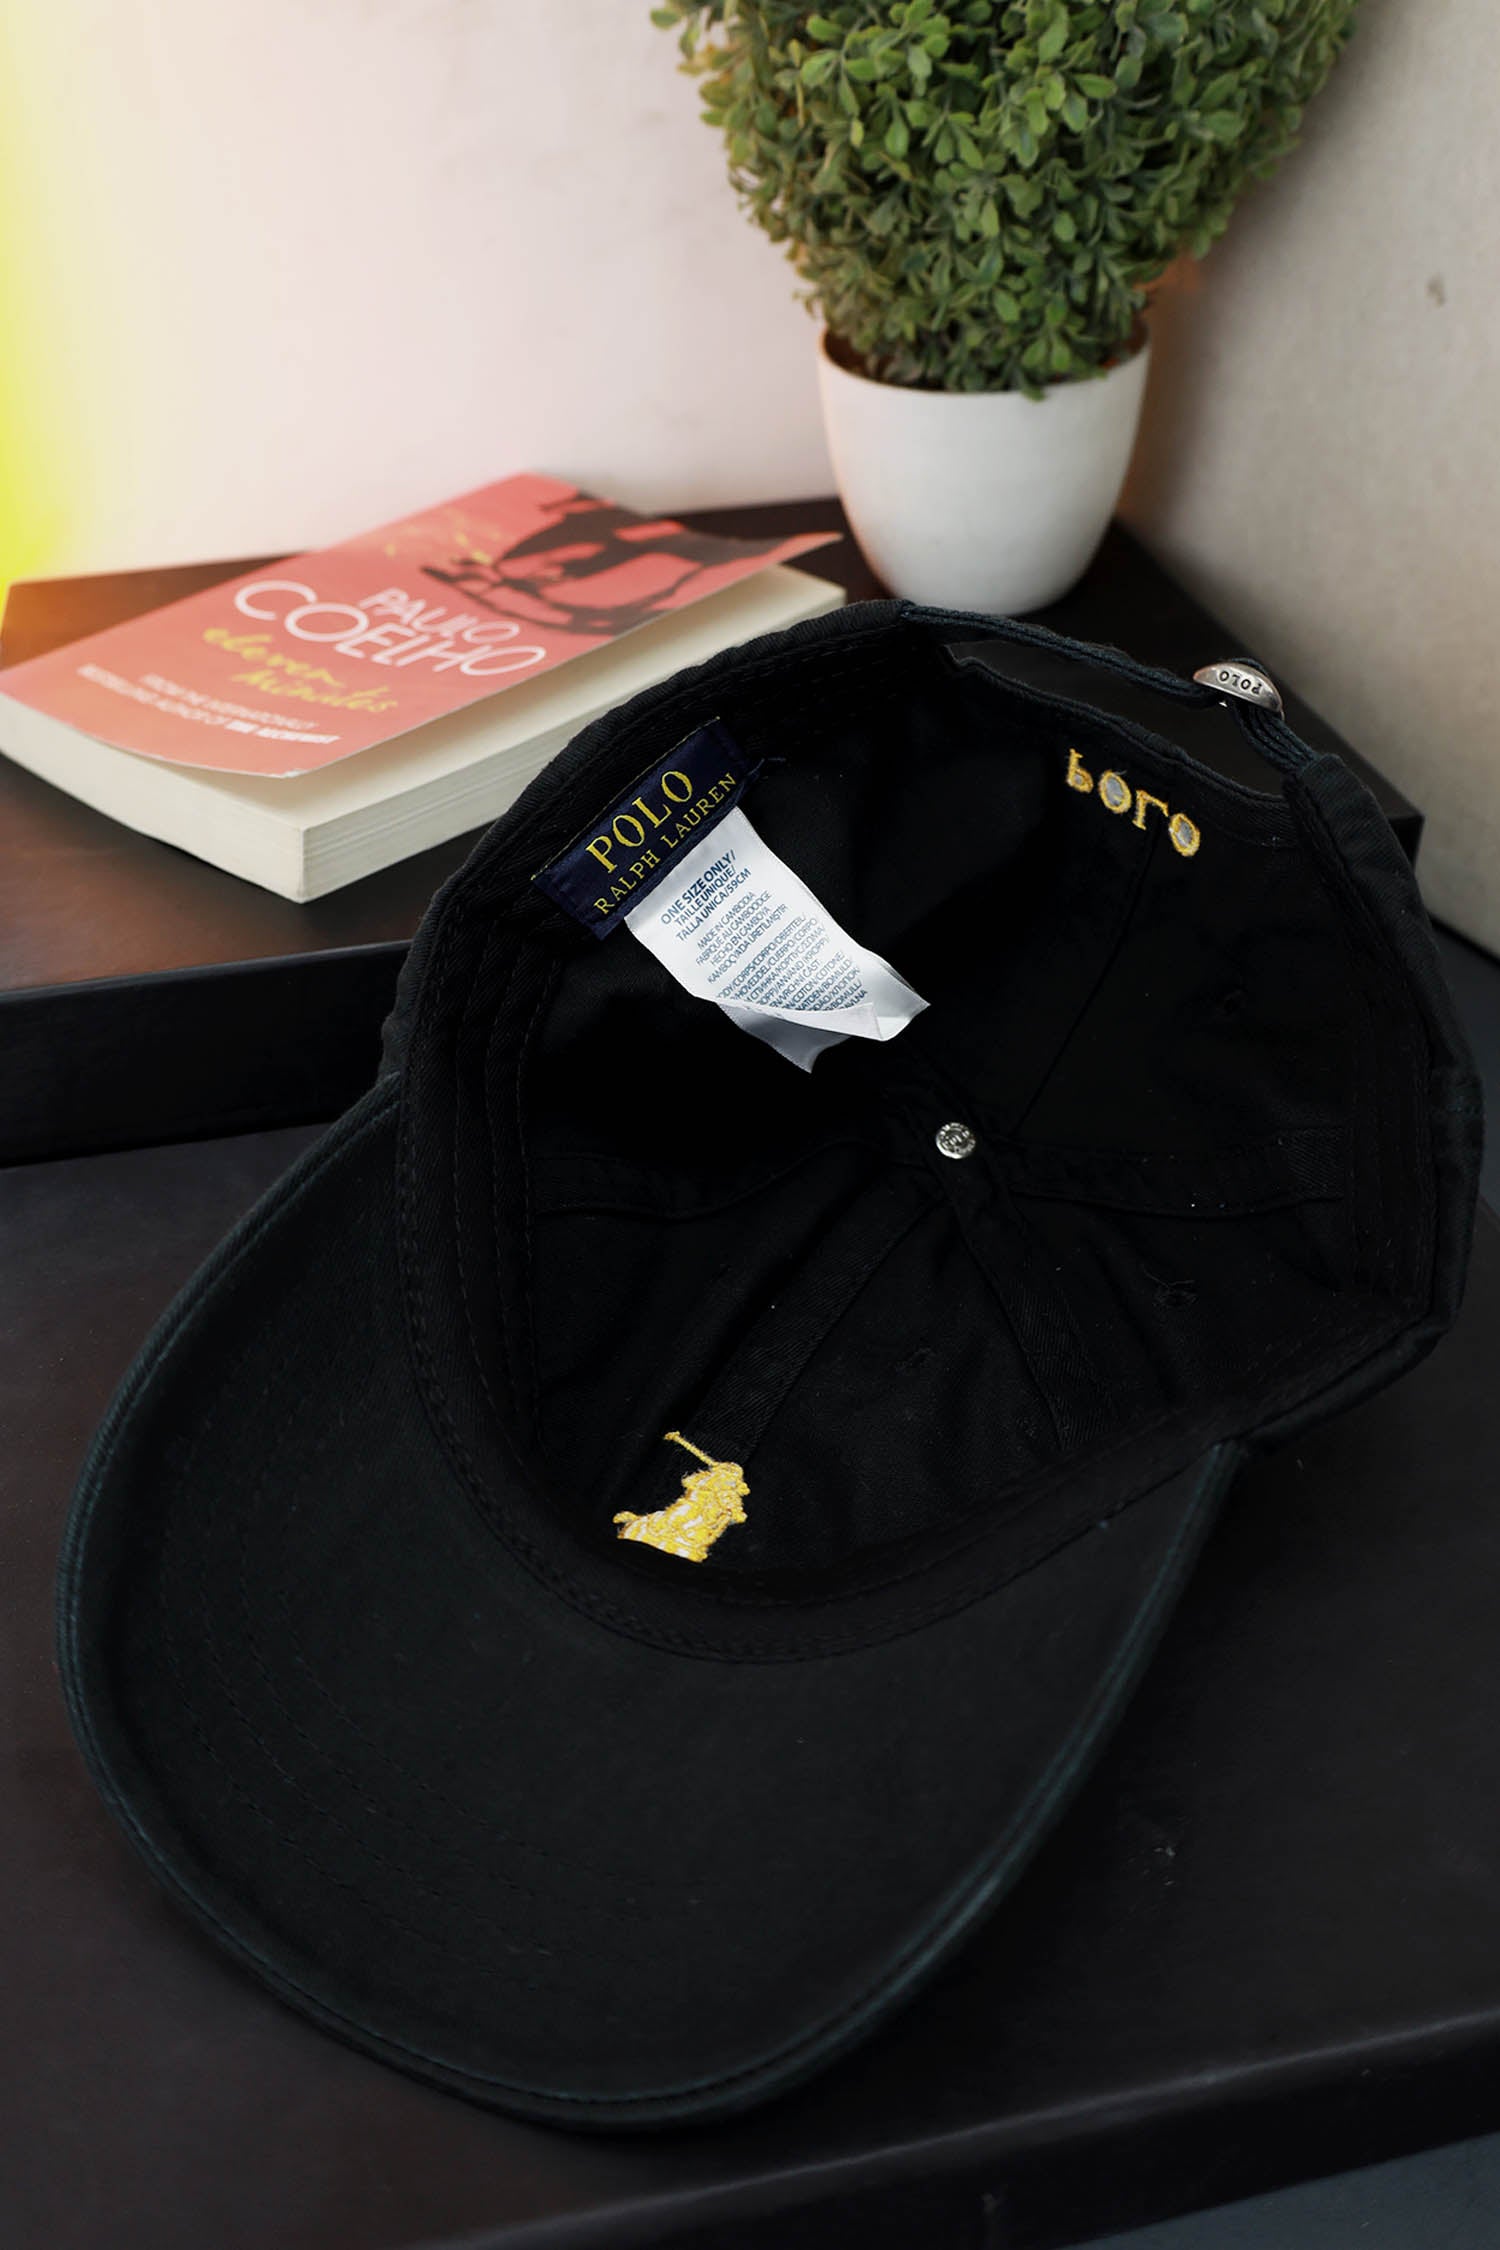 Polo Embroidered logo Cotton Cap In Black And Yellow